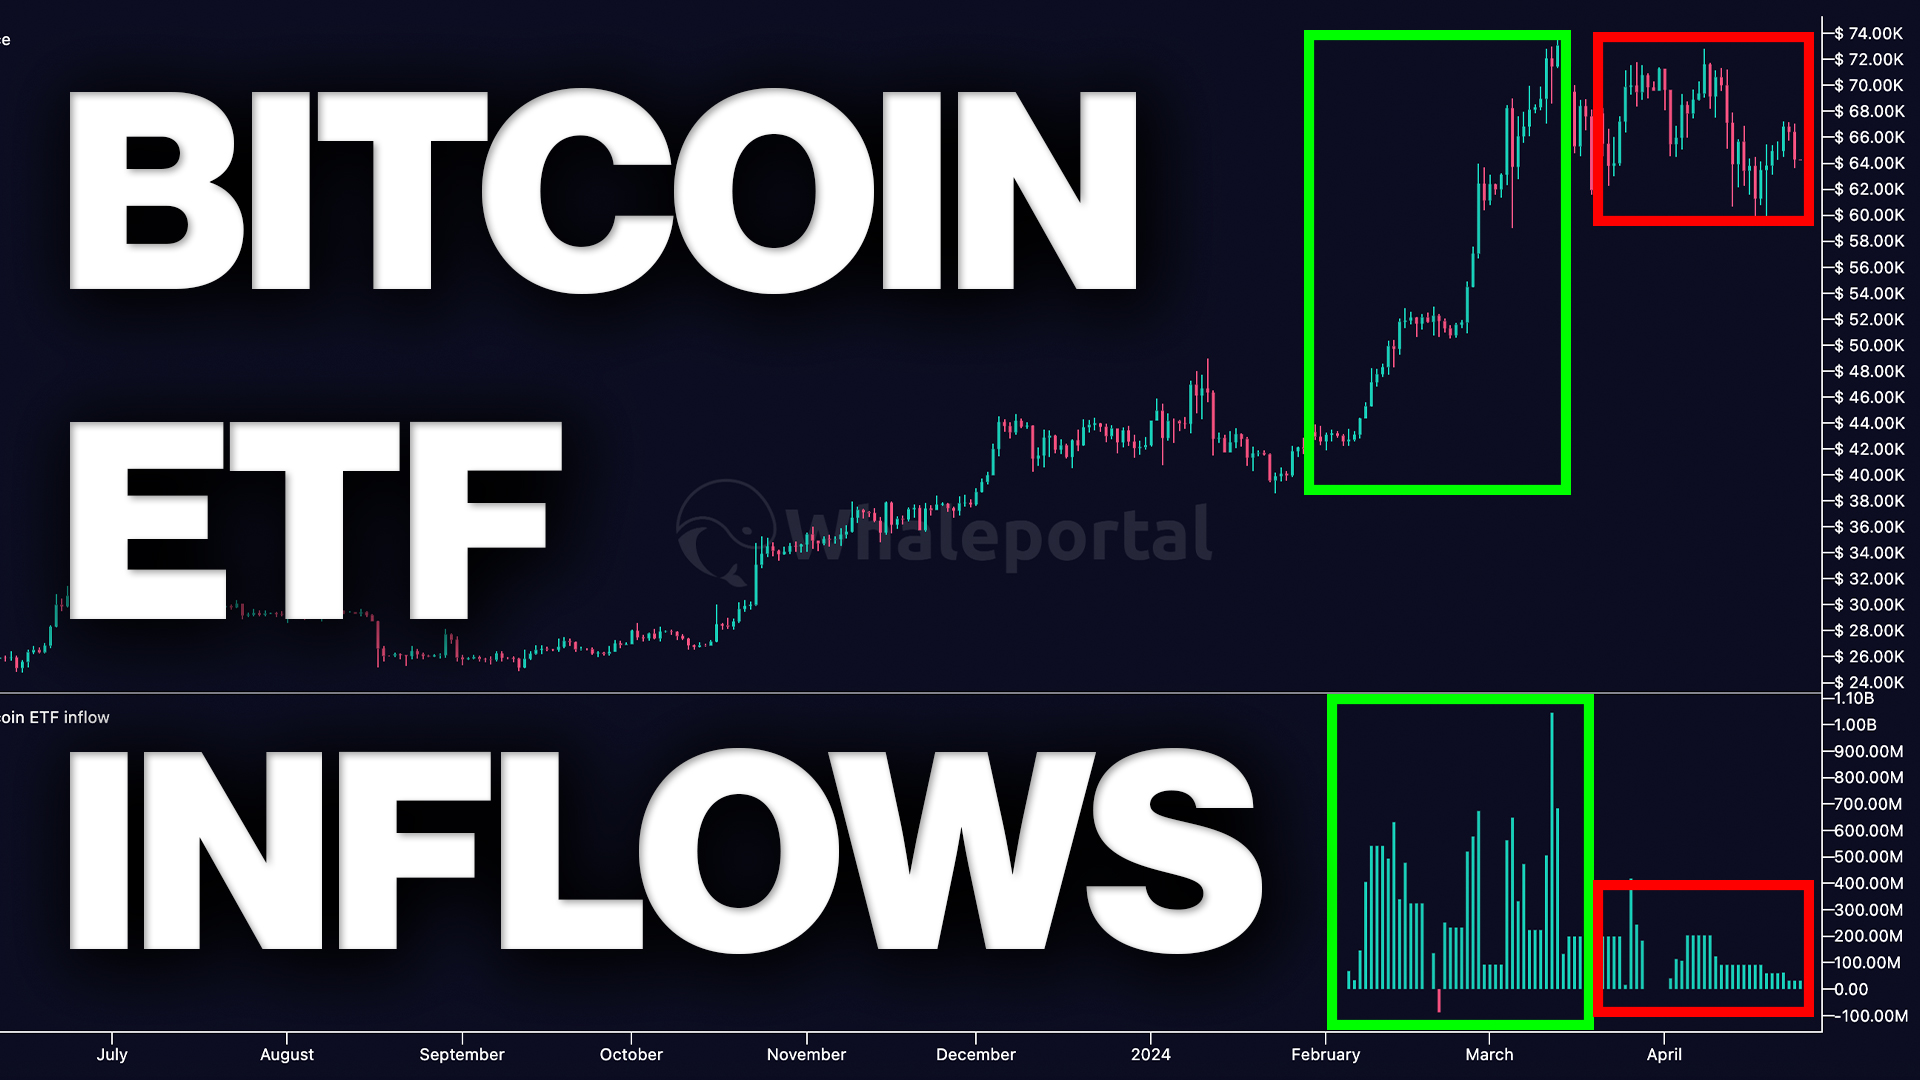 Bitcoin ETF inflow chart compared to the Bitcoin price